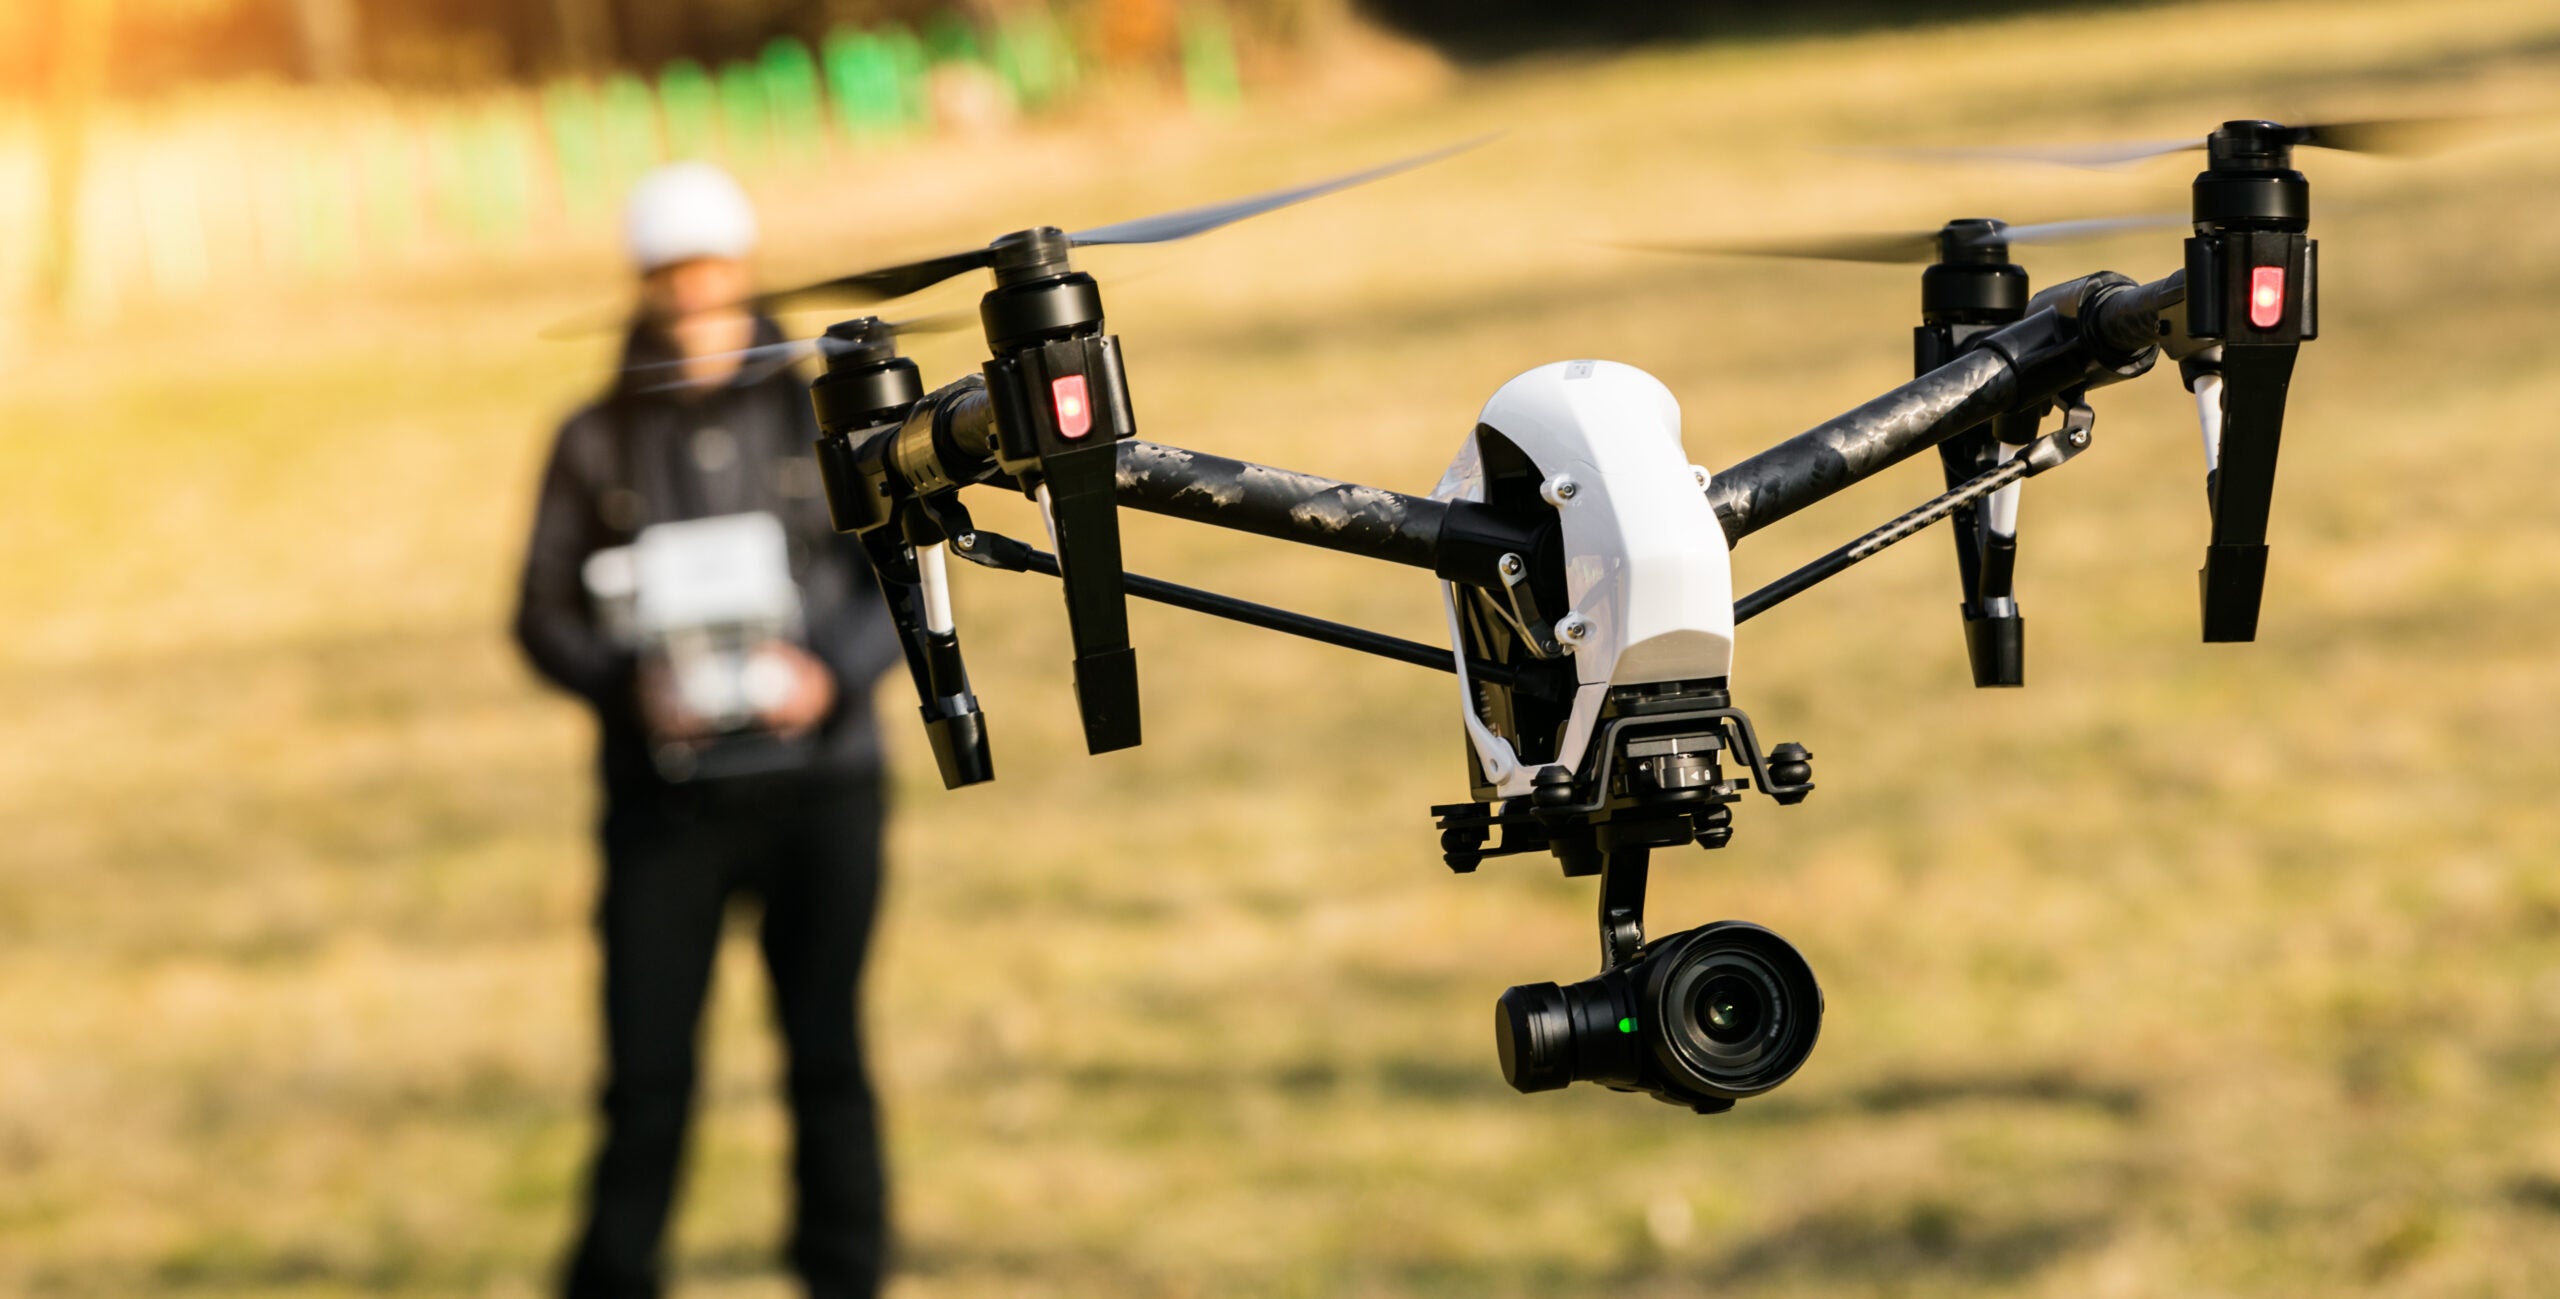 Where Can I Find an Online Drone Pilot Course? 